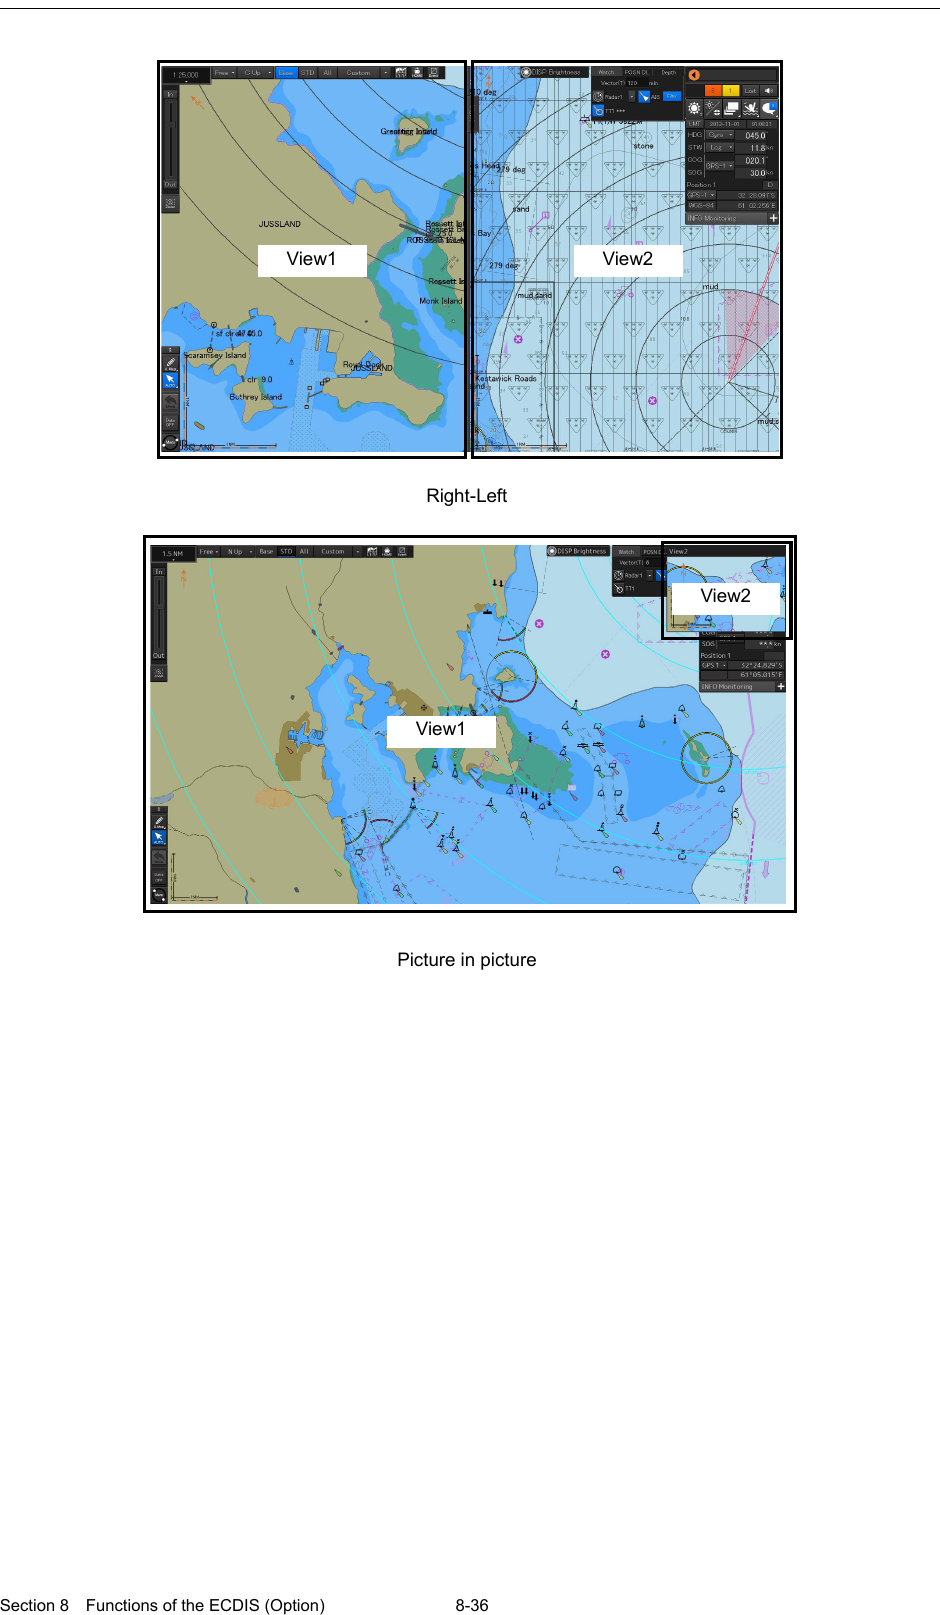  Section 8  Functions of the ECDIS (Option) 8-36       Right-Left    View1 View2 Picture in picture   View2 View1 